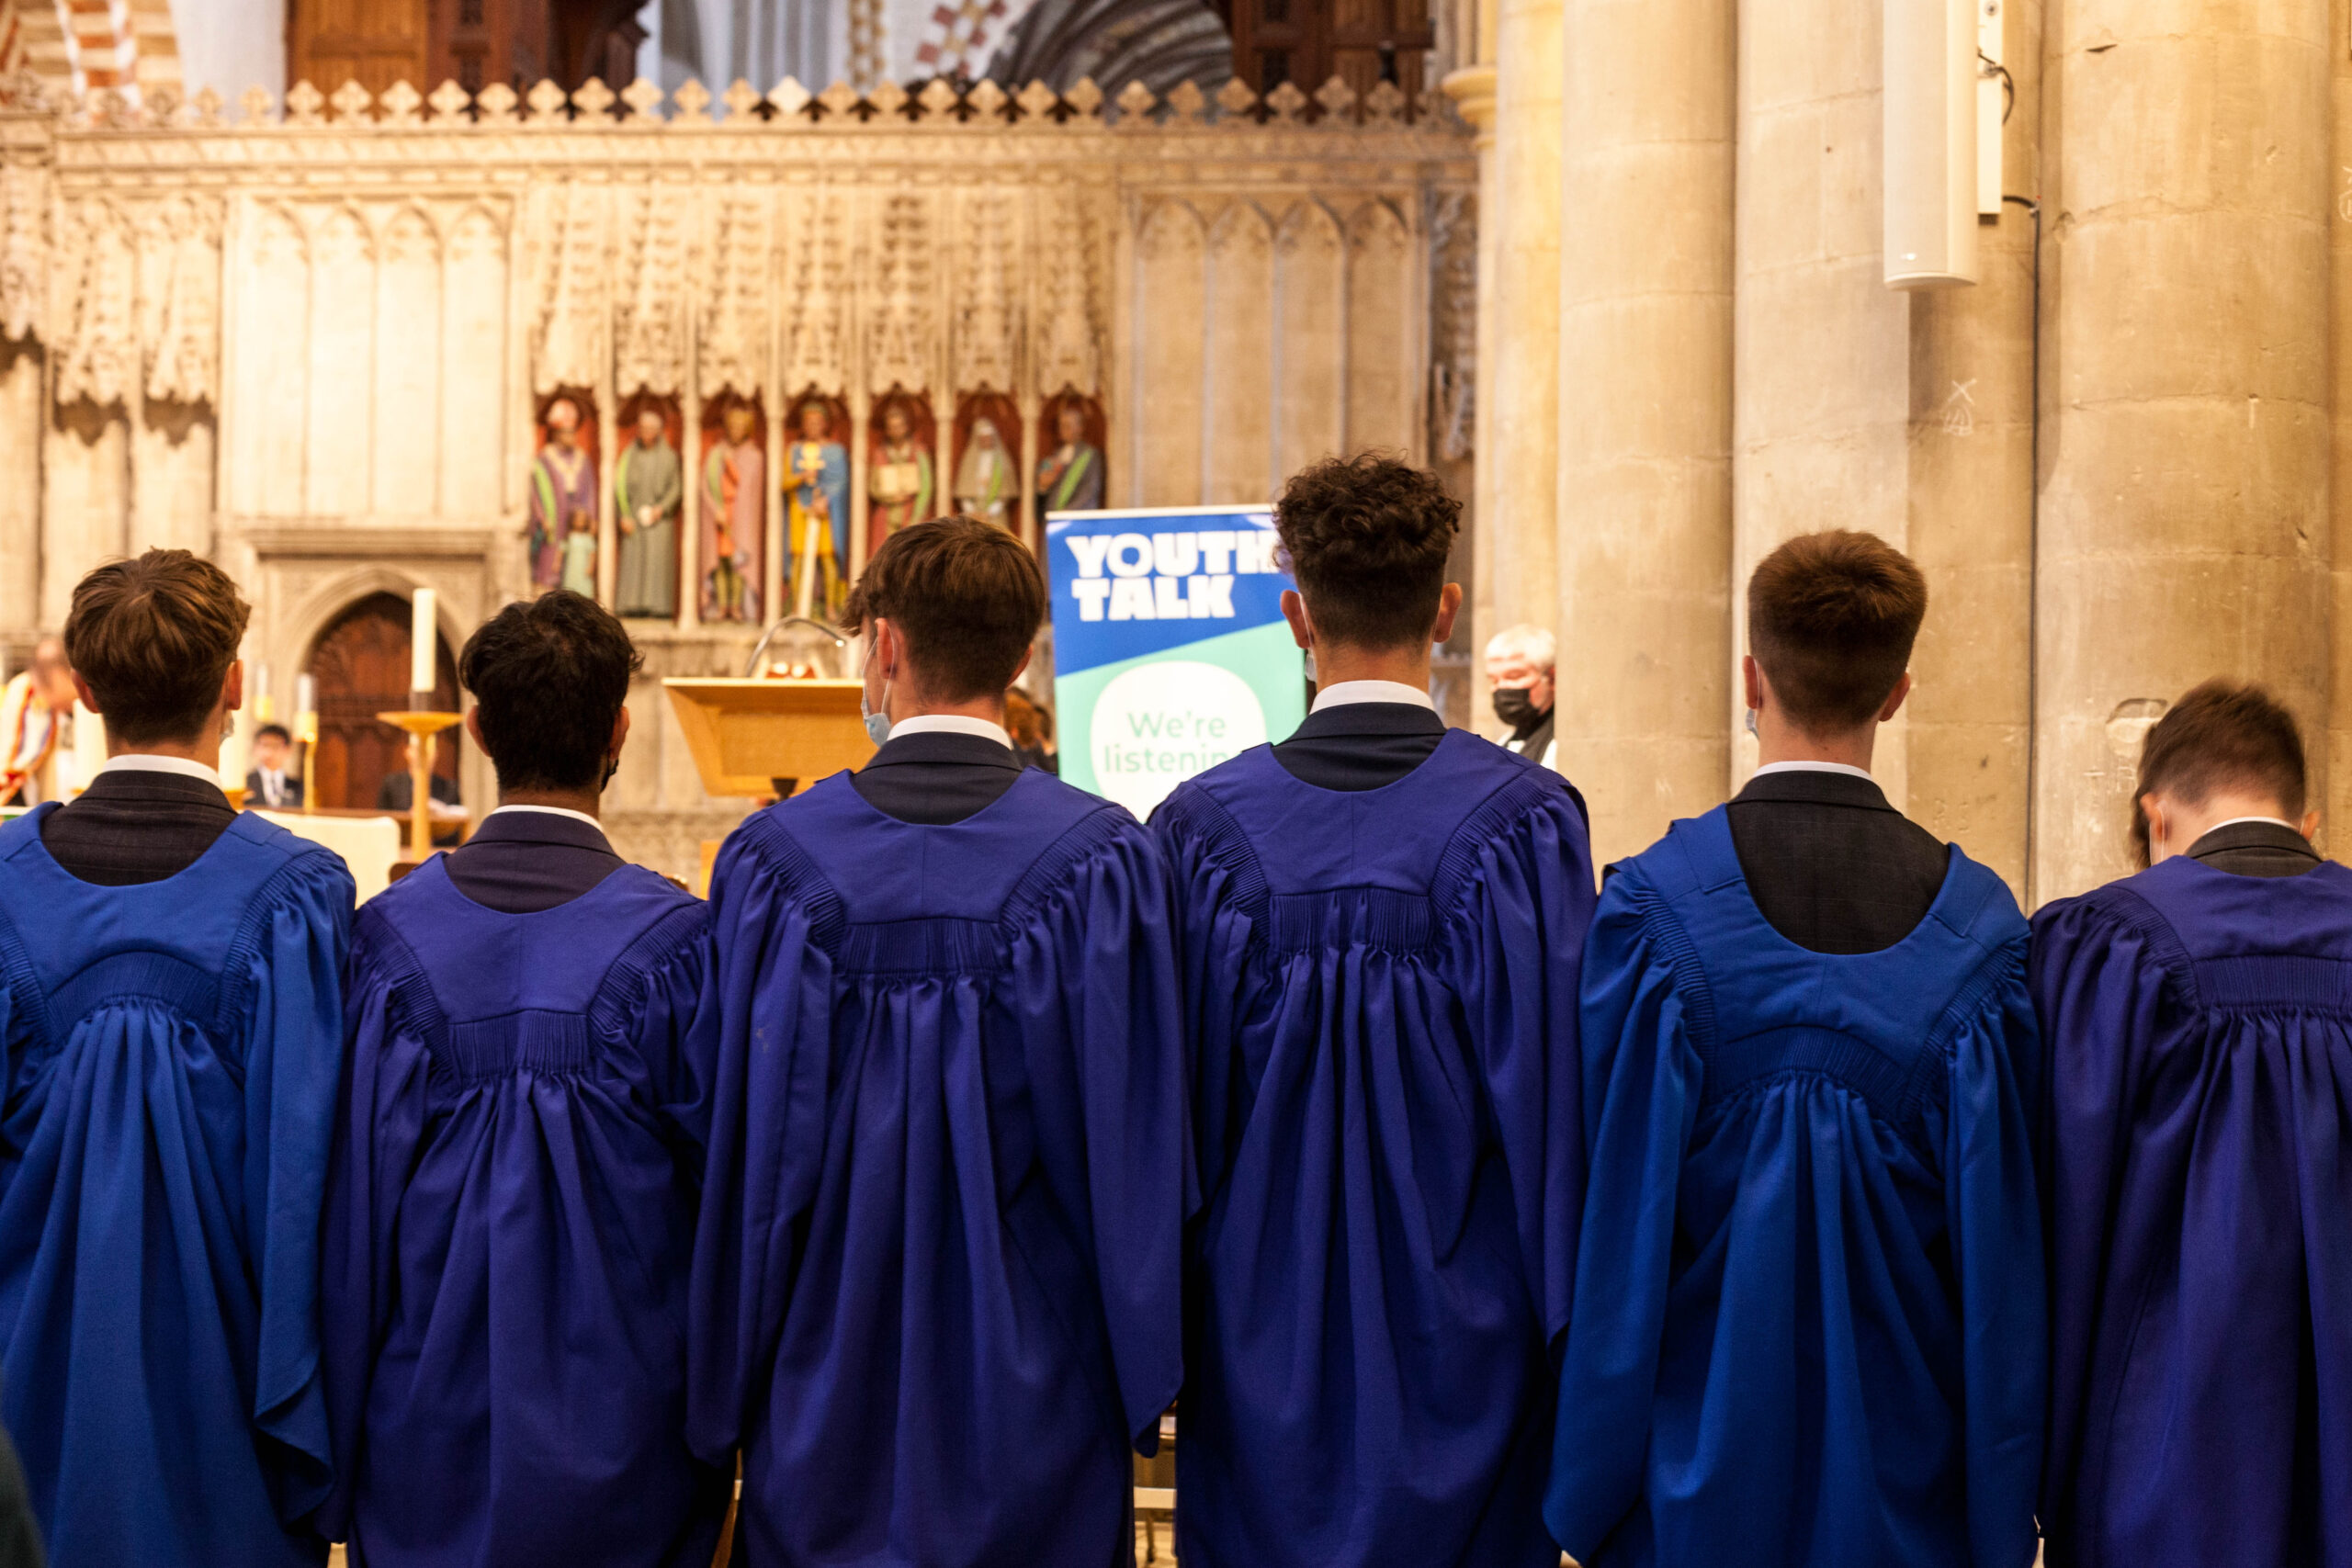 A group of Verulam School students standing in St Albans Cathedral in blue gowns